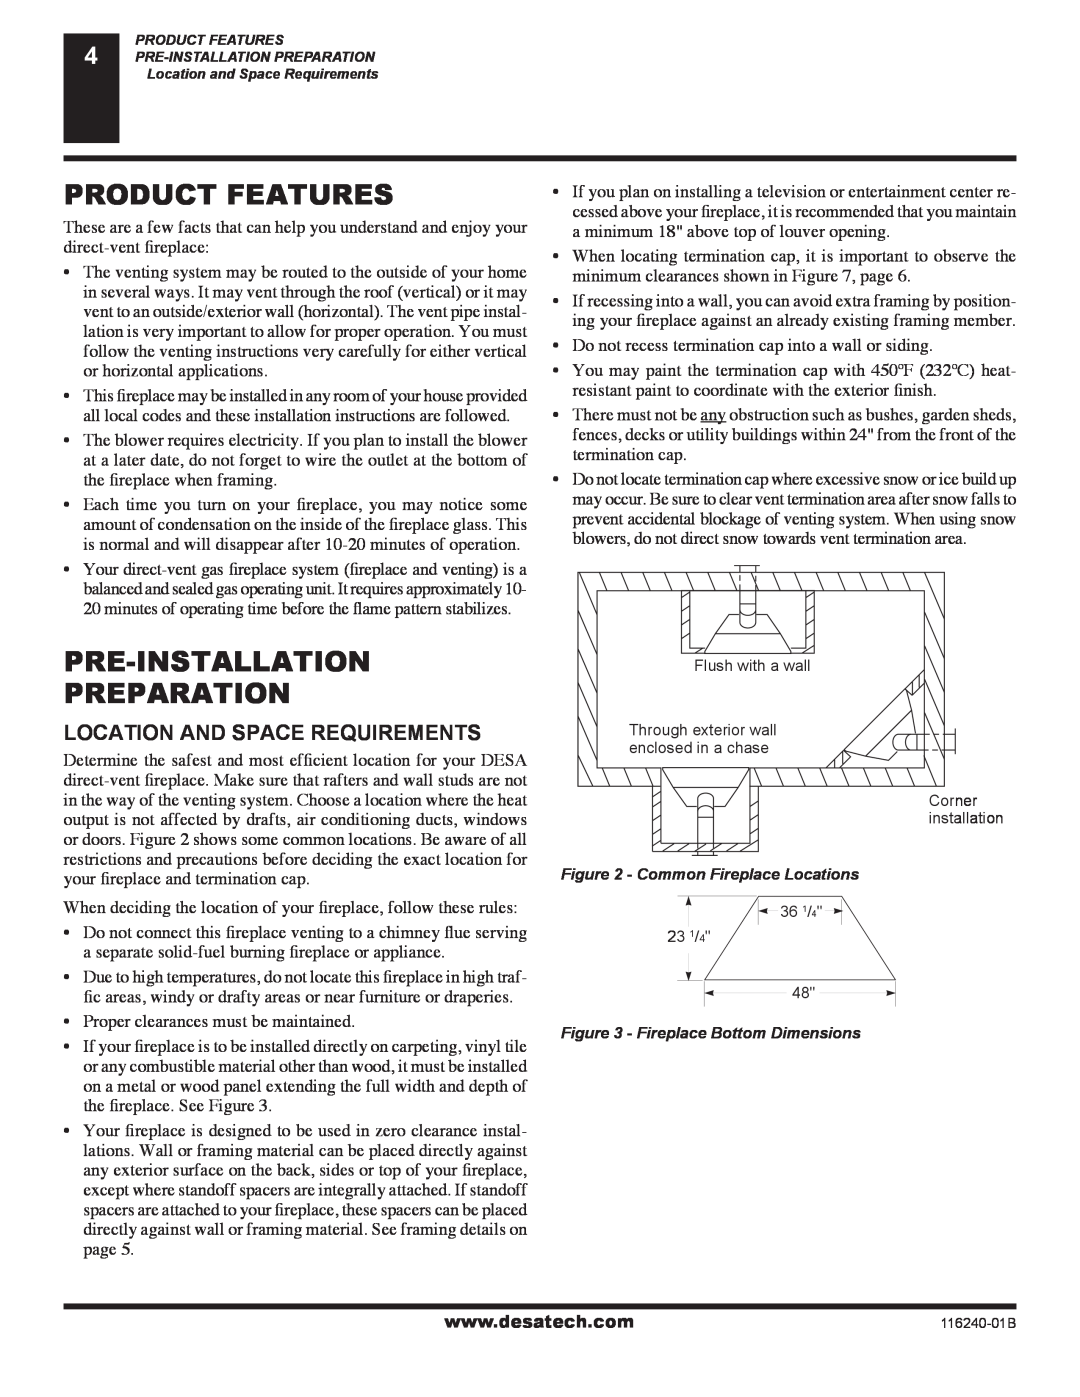 Desa (V)KC42NE SERIE installation manual Product Features, Pre-Installation Preparation, Location And Space Requirements 